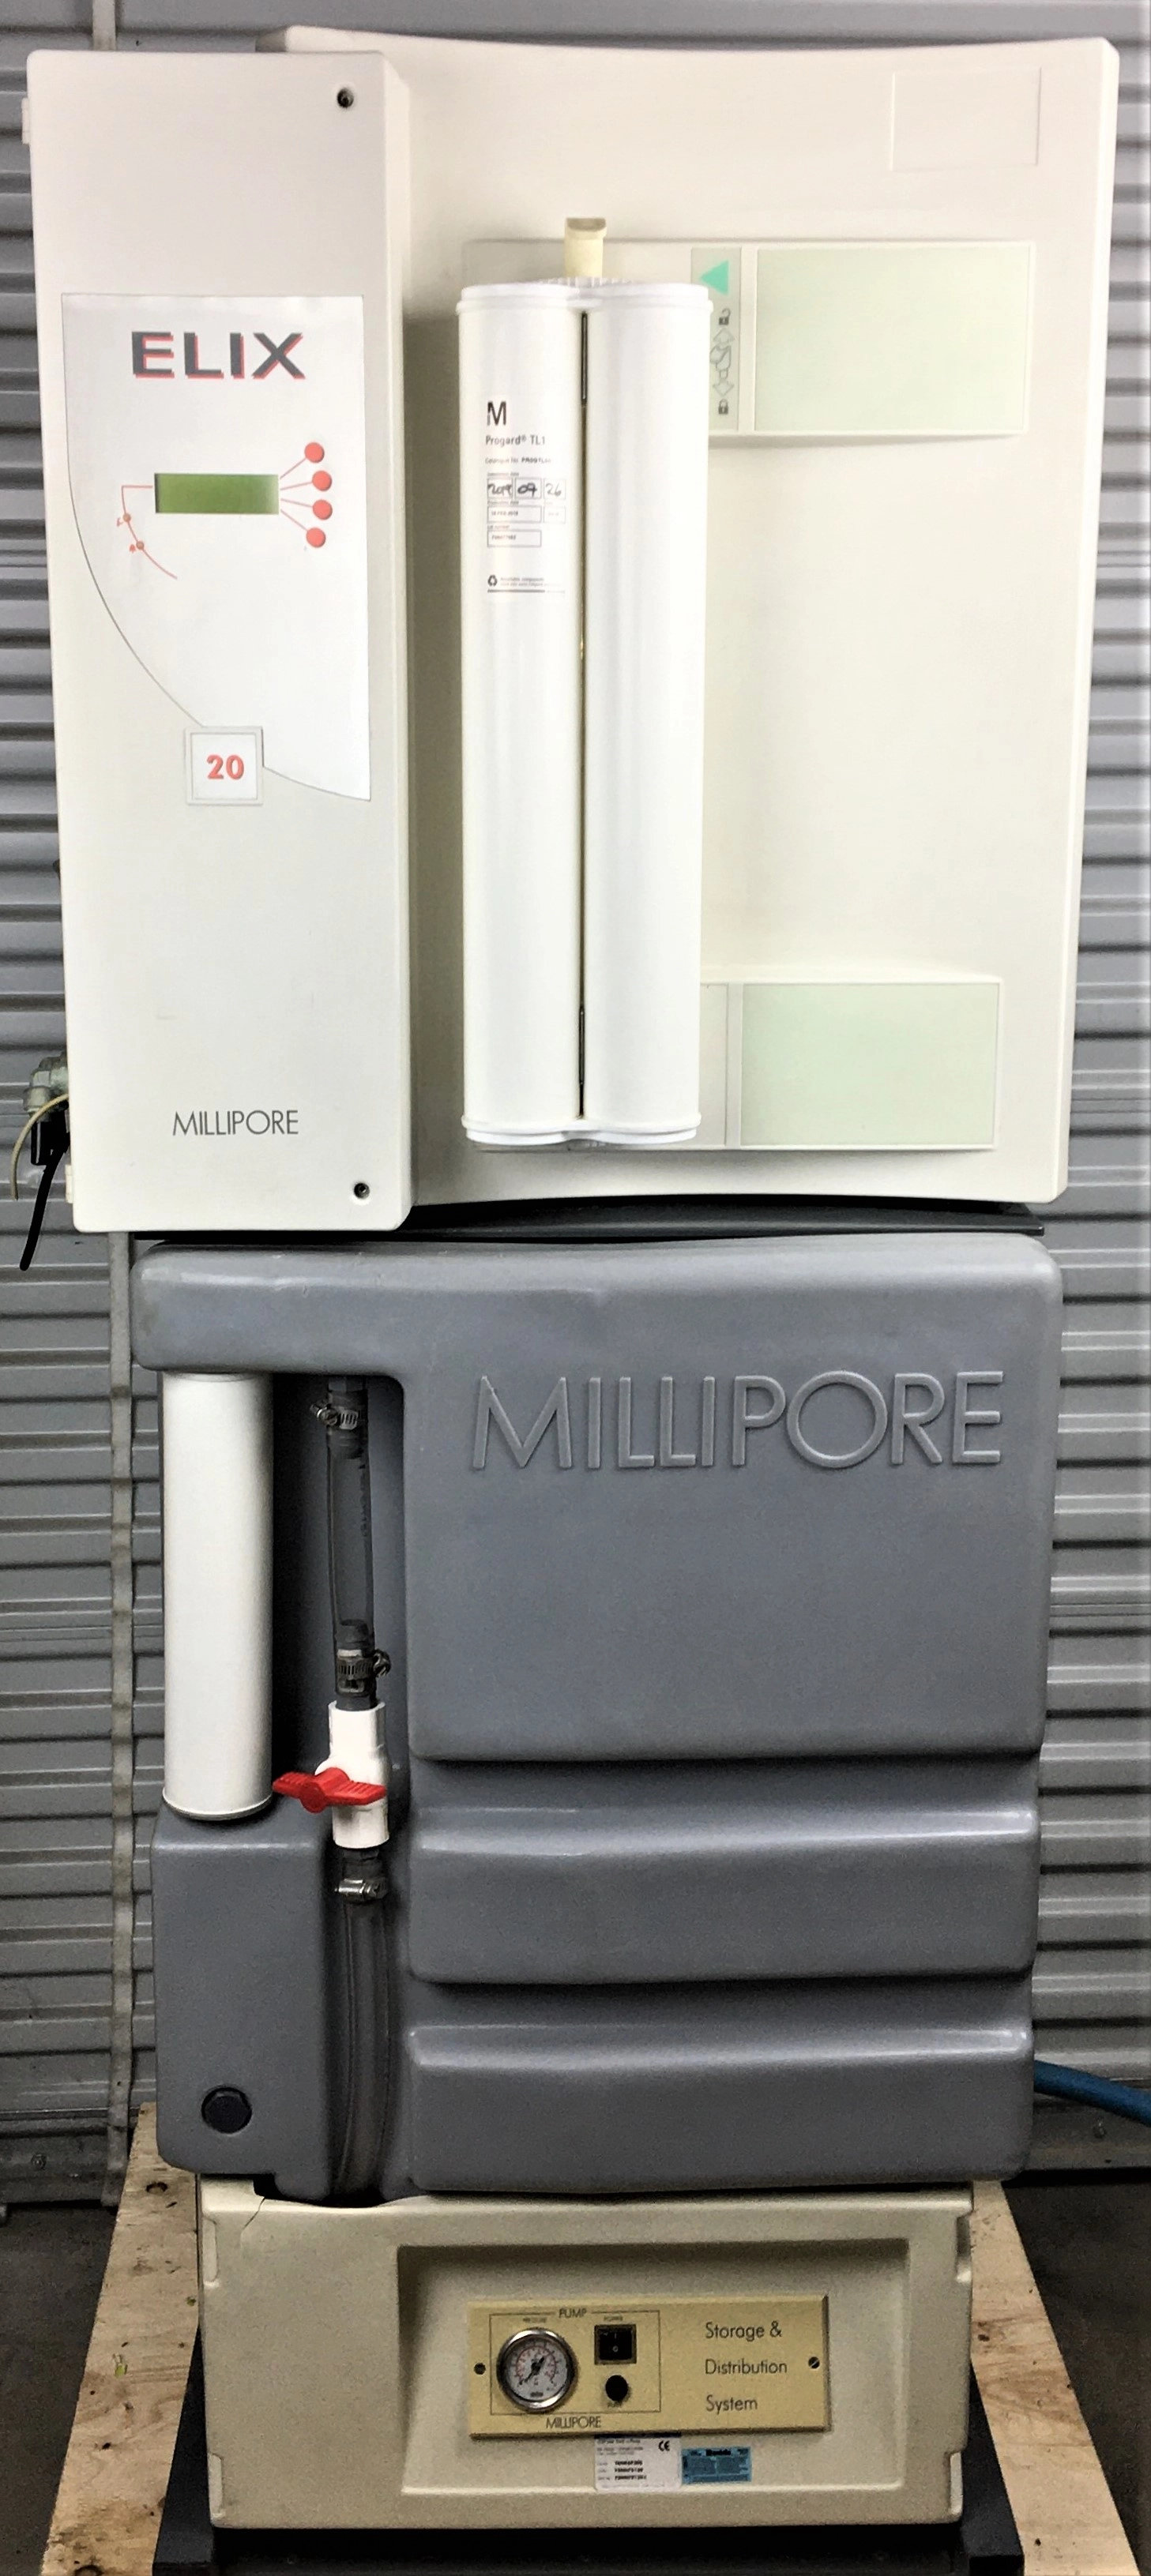 Millipore Elix 20 with SDS-200 Water Purification System